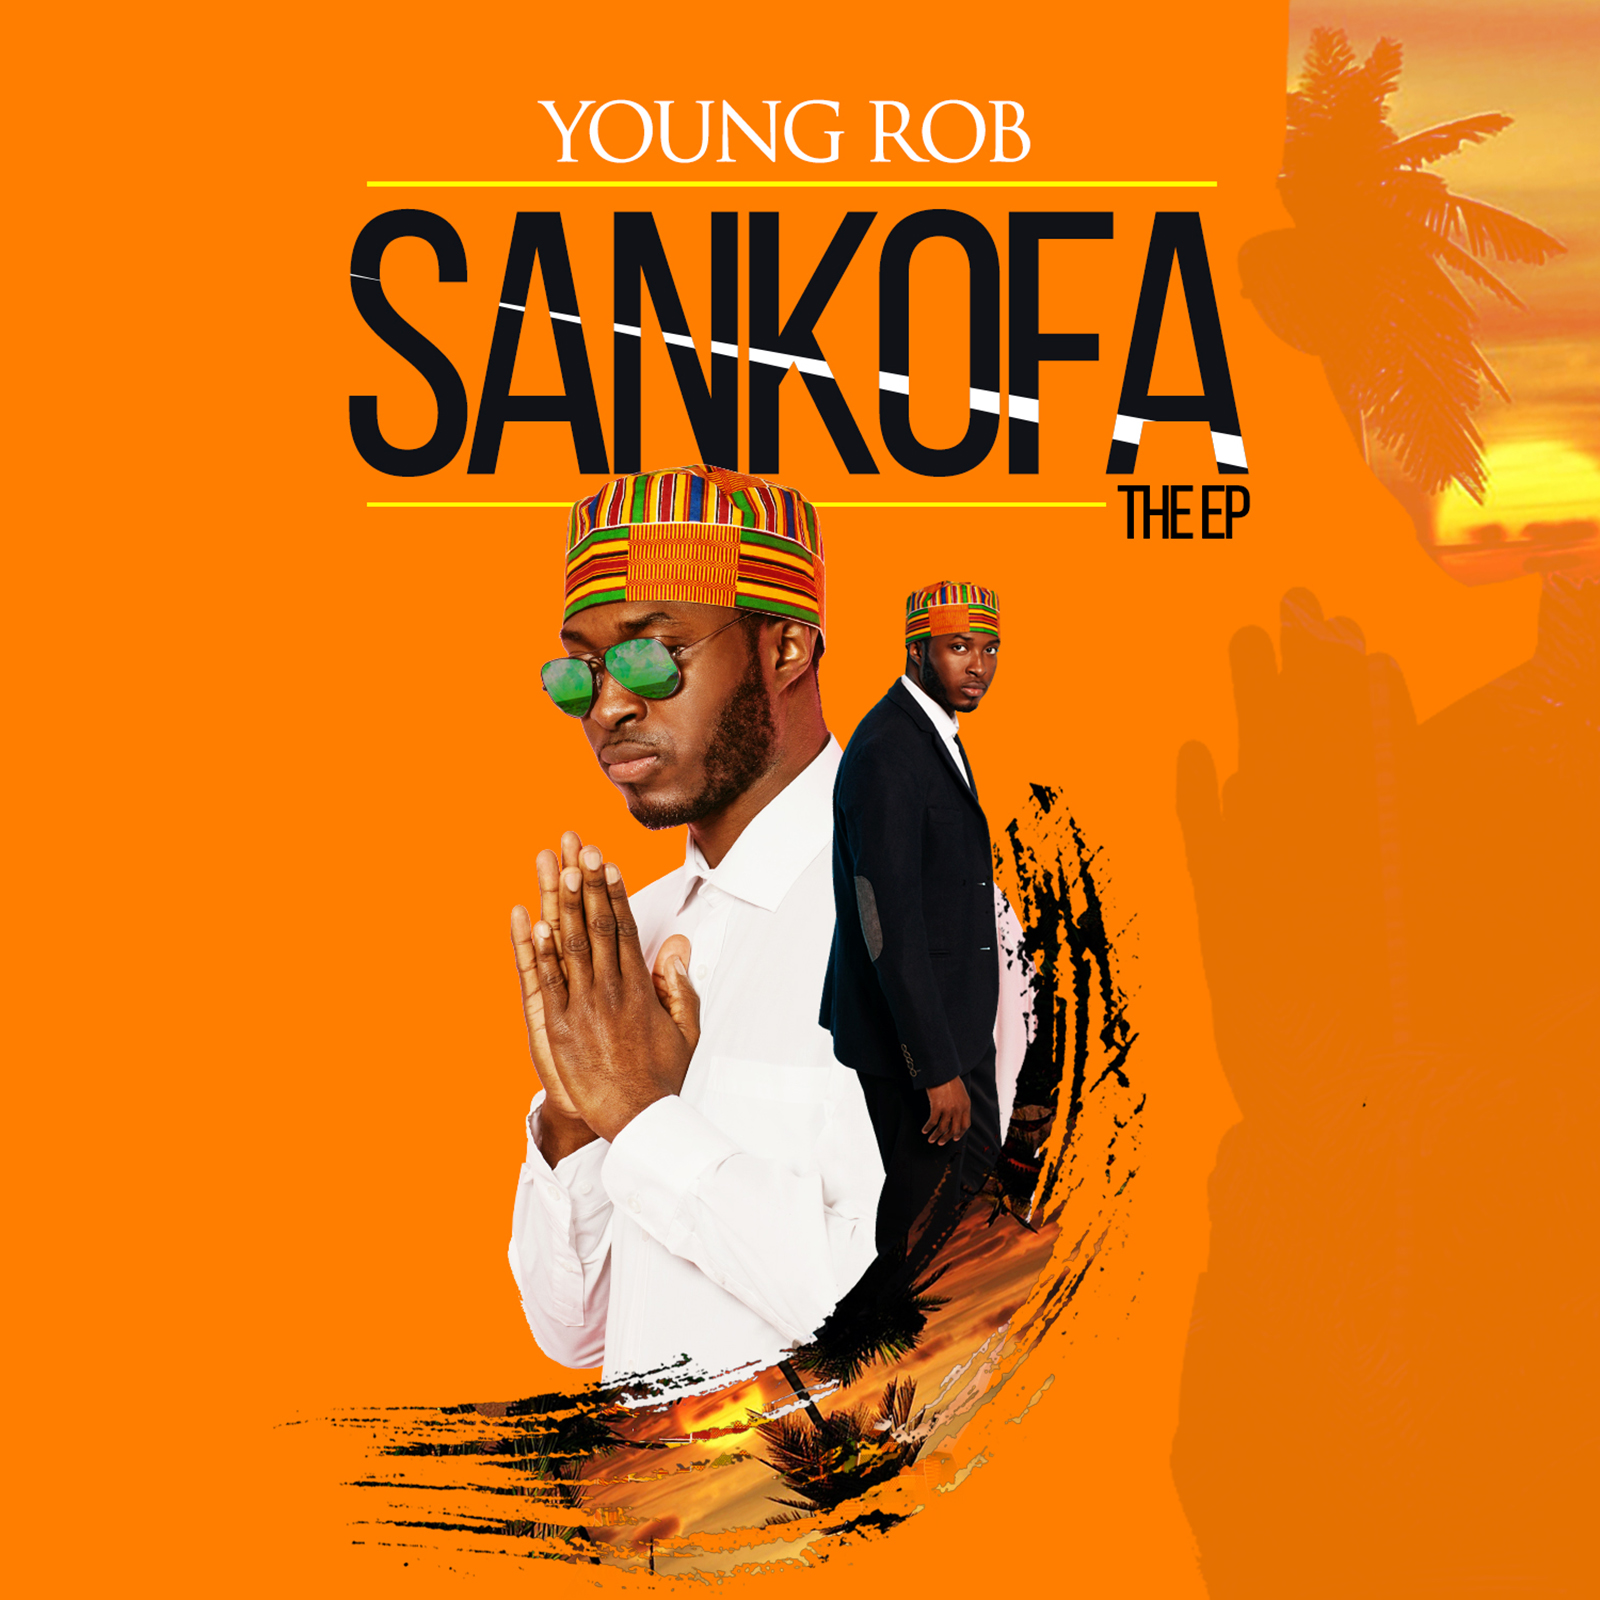 Sankofa EP by Young Rob